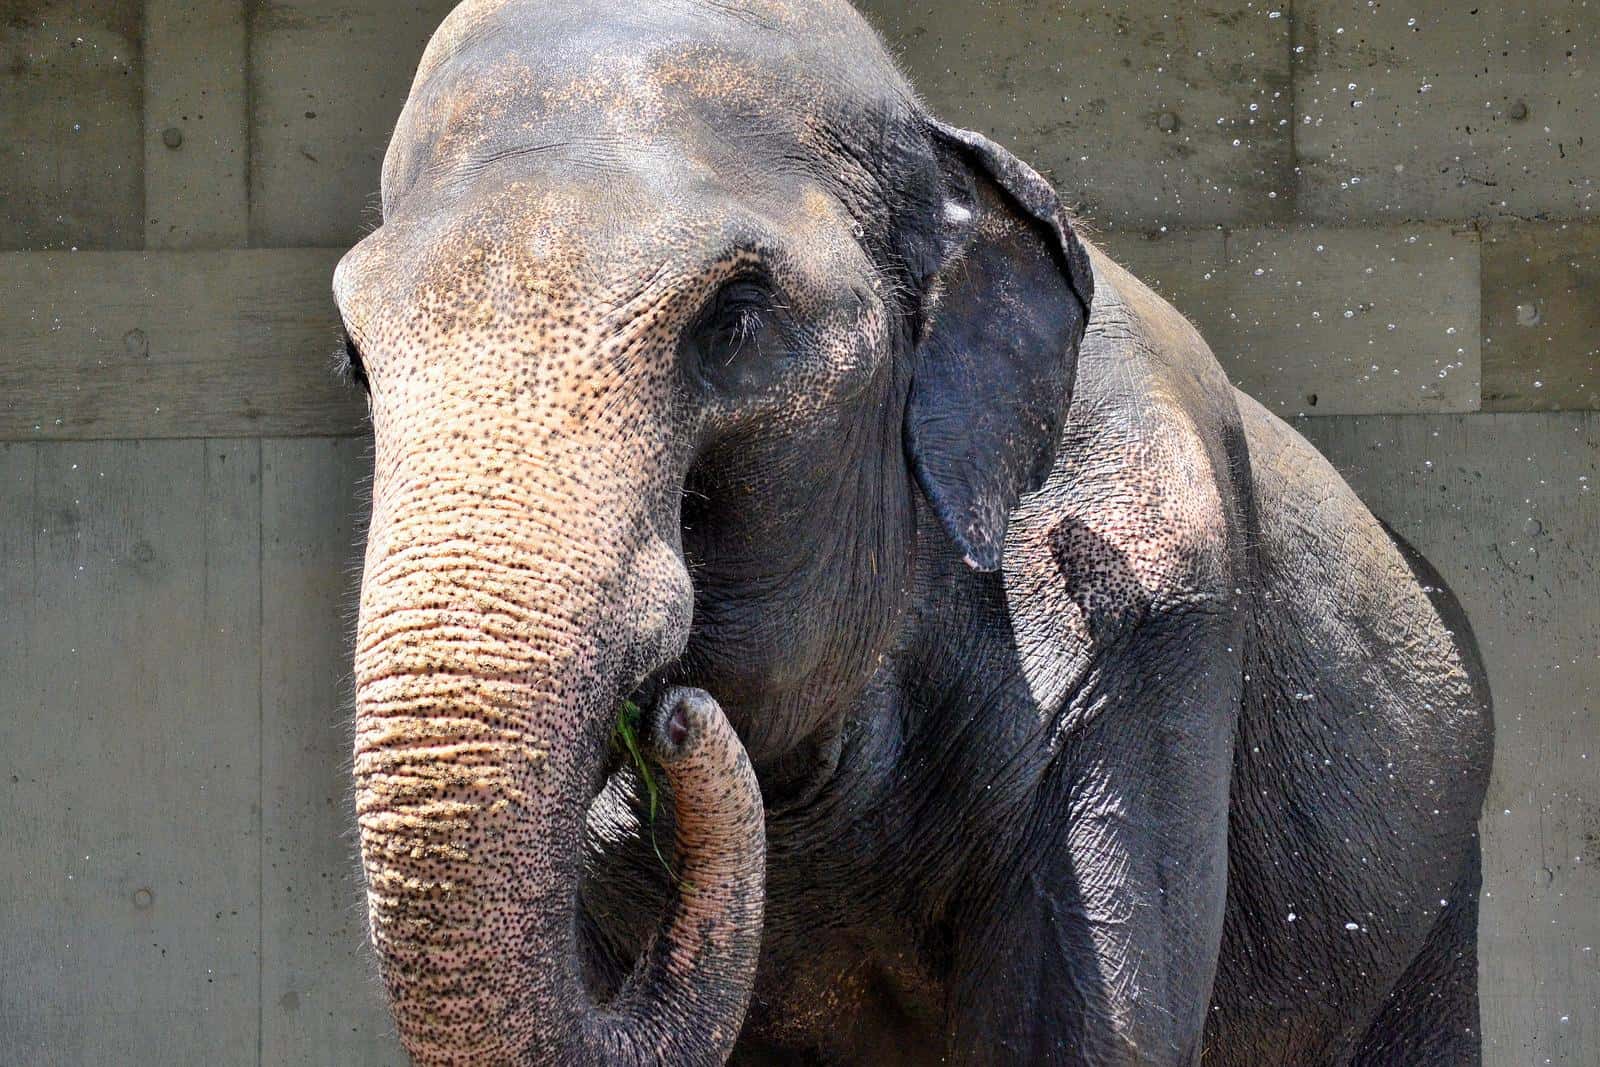 A close-up of an Indian Elephant.